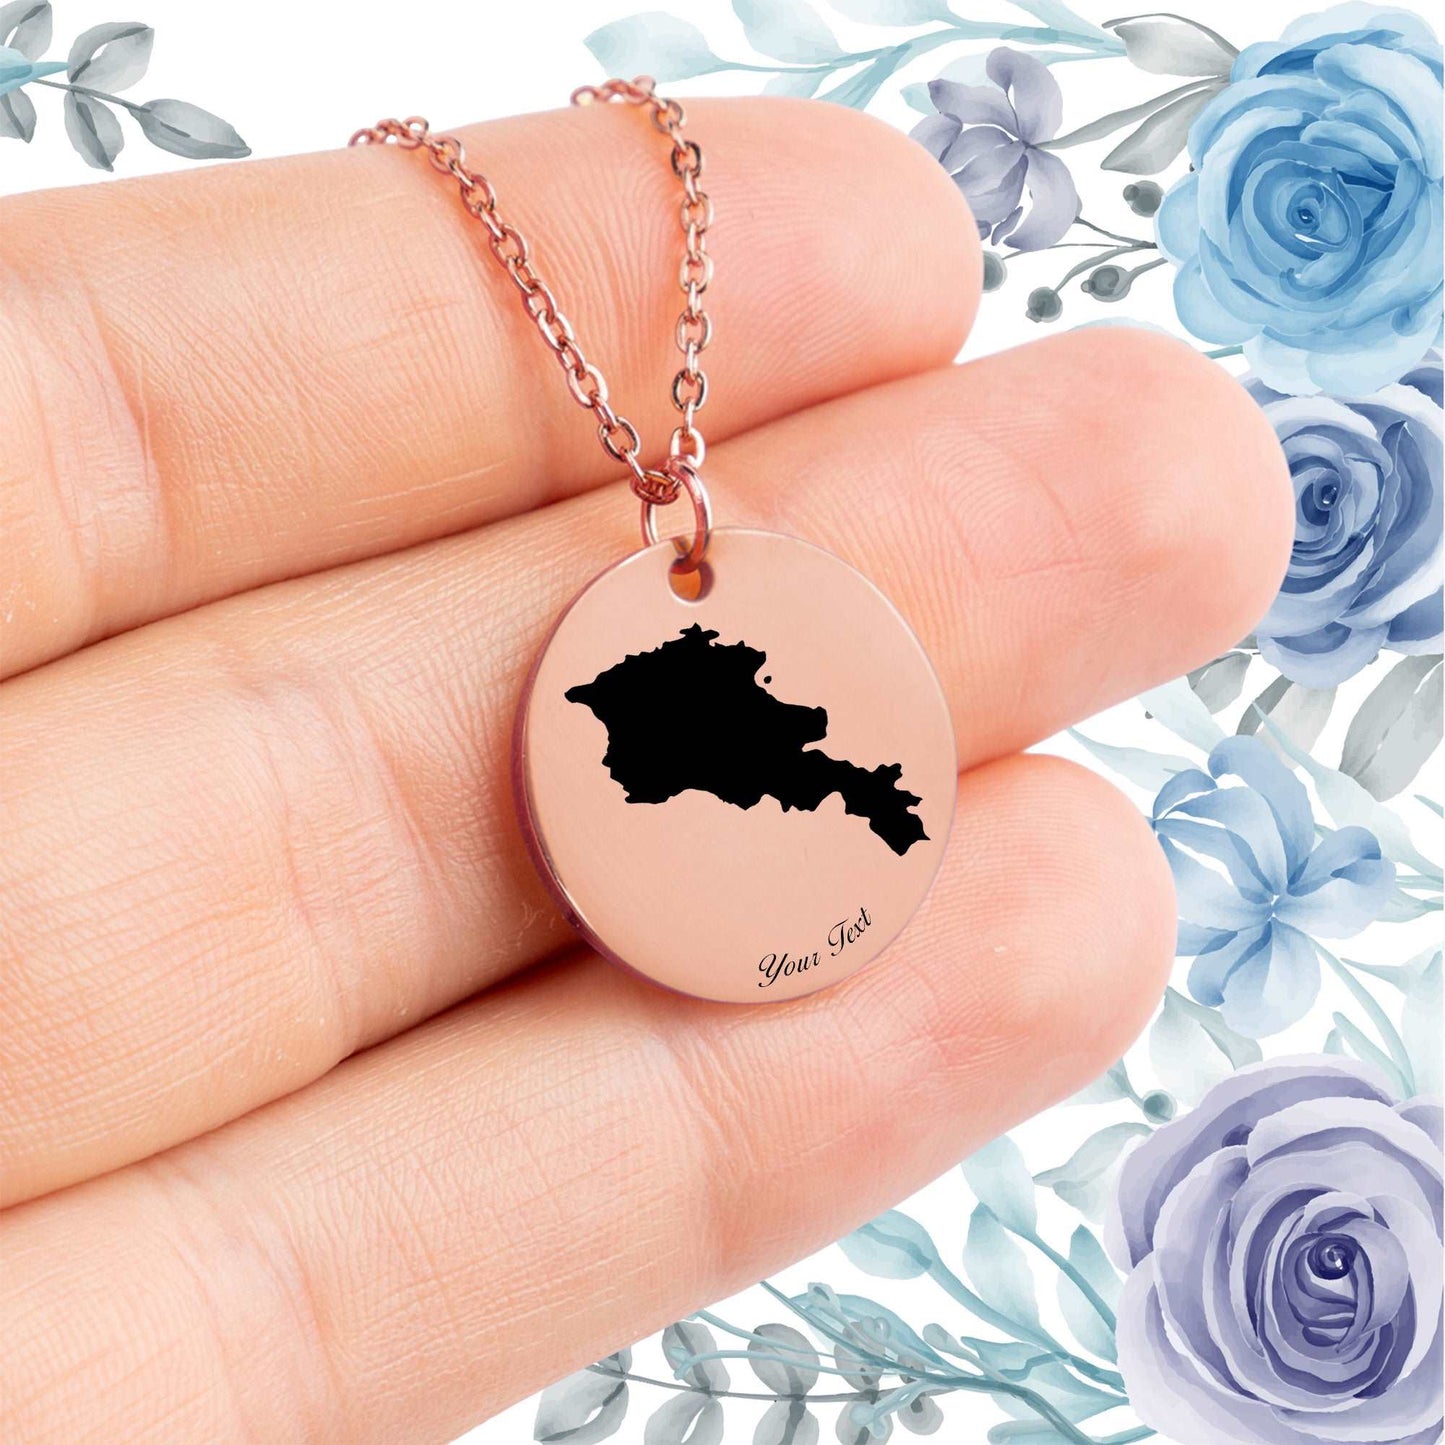 Armenia Country Map Necklace - Personalizable Jewelry